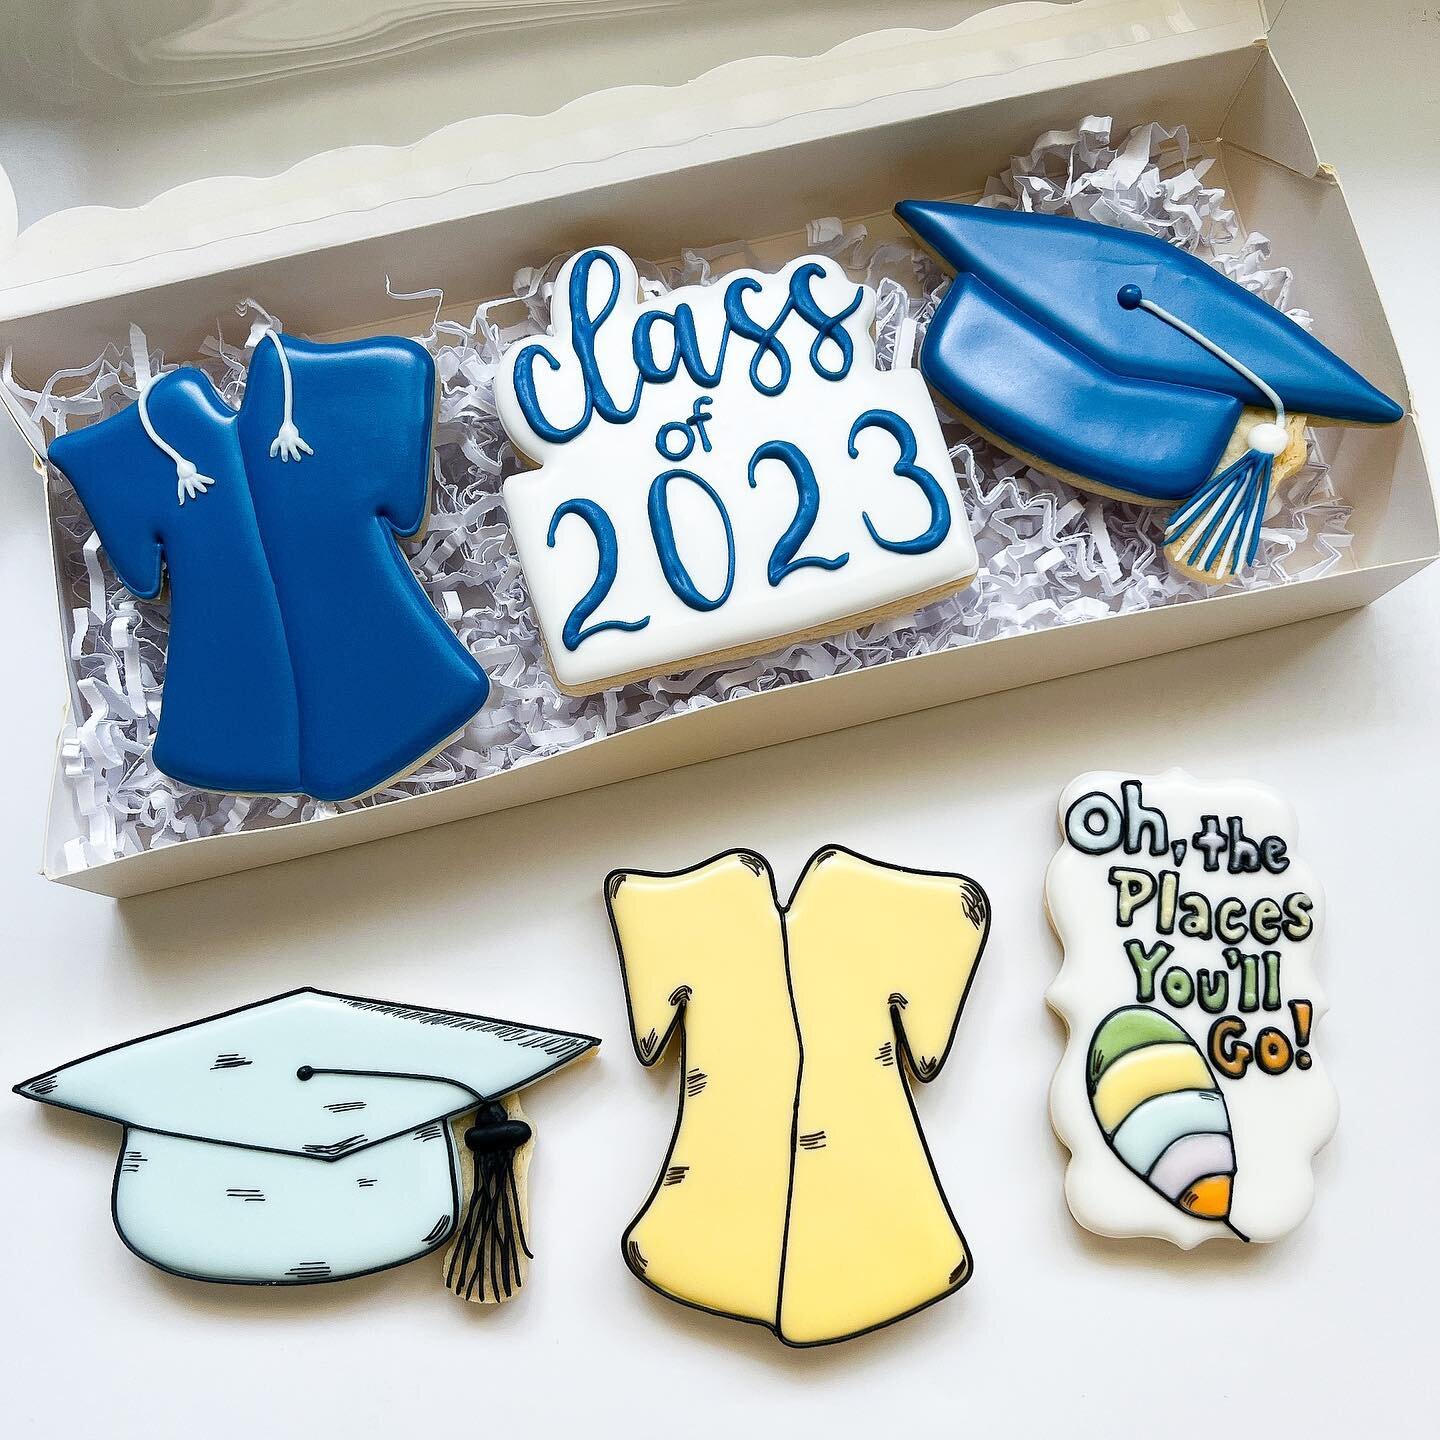 Class of 2023

Graduation sets are available to purchase directly through my website www.samanthassweethouse.ca Many pickup dates to choose from!!

#samanthassweethouse #customcookies #cookiesofinstagram #angusontario #georgina #newmarketontario #bra